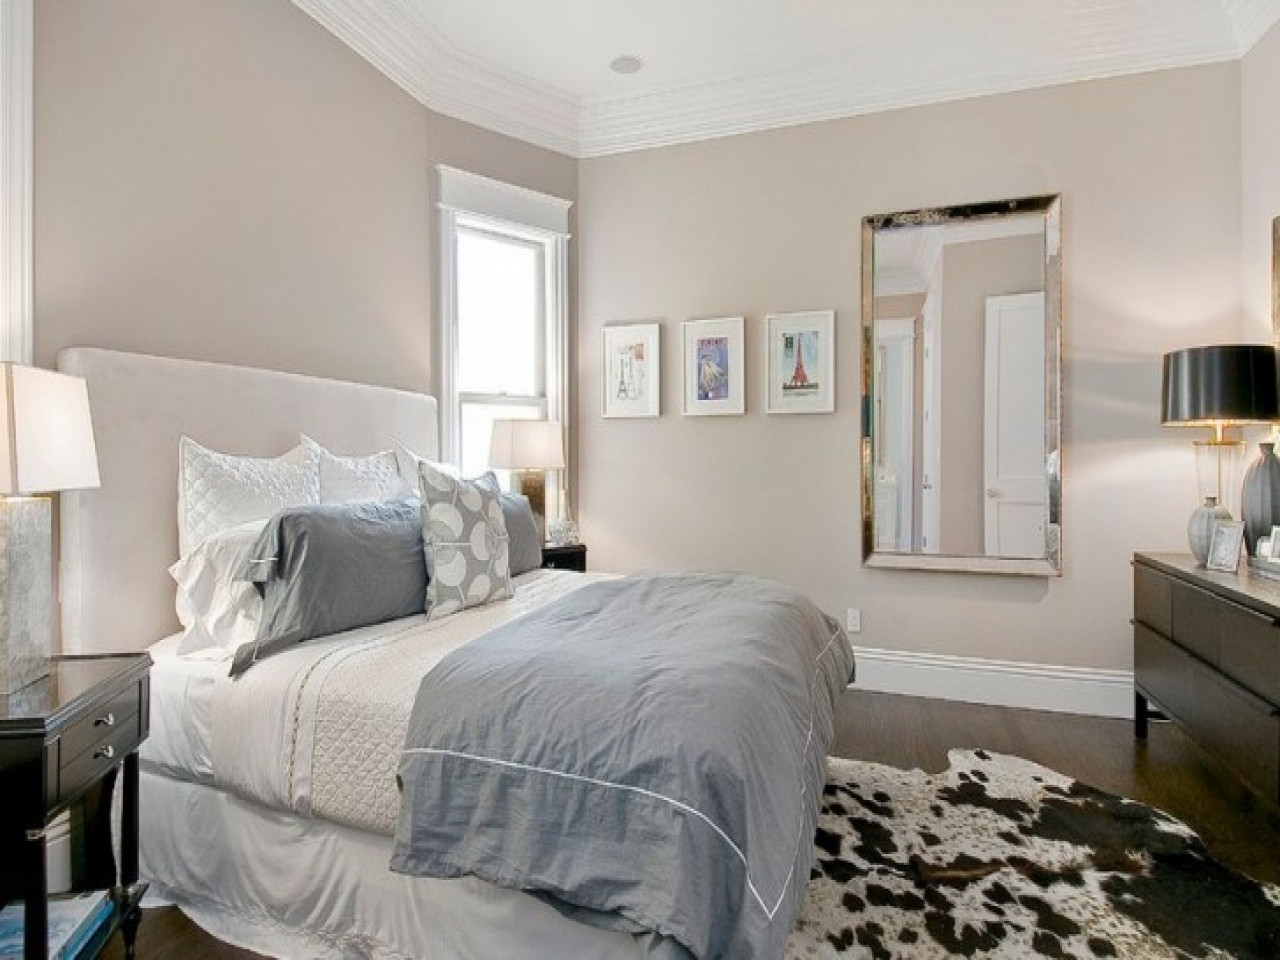 Soothing Paint Colors For Bedrooms
 Six Bedrooms Color Choice Affects Your Mood